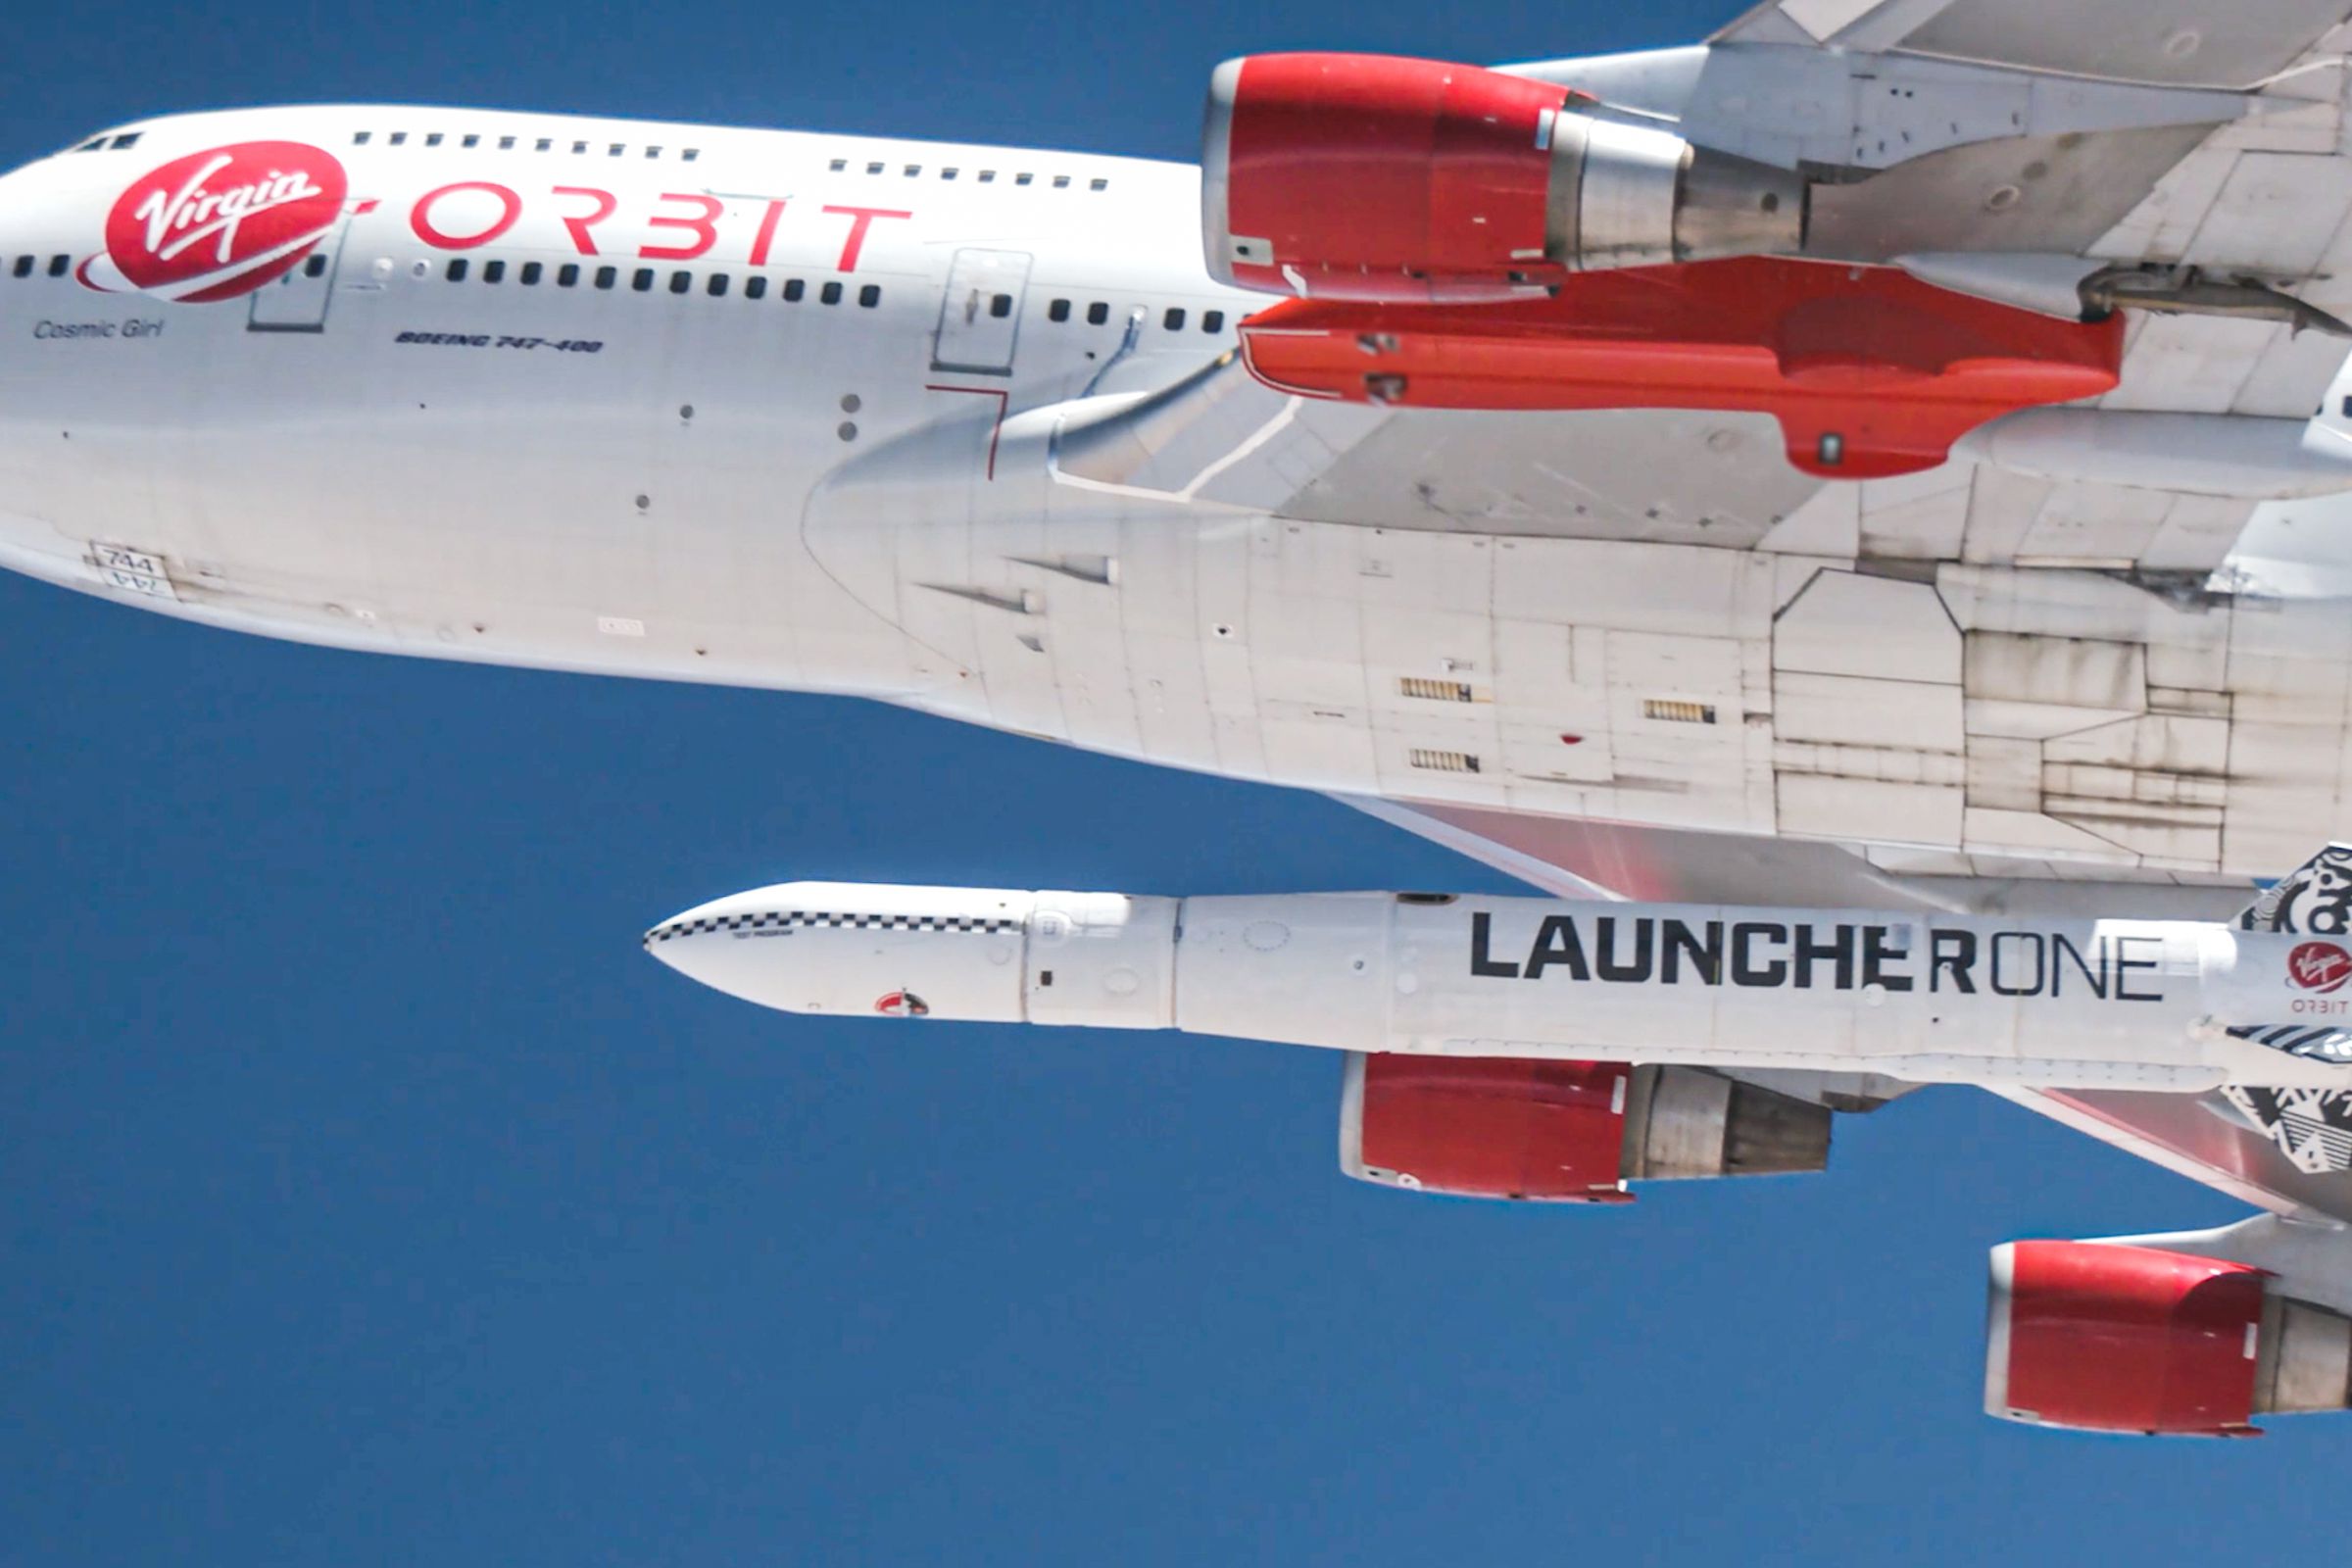 Virgin Orbit’s airborne rocket-launching system during a previous test.